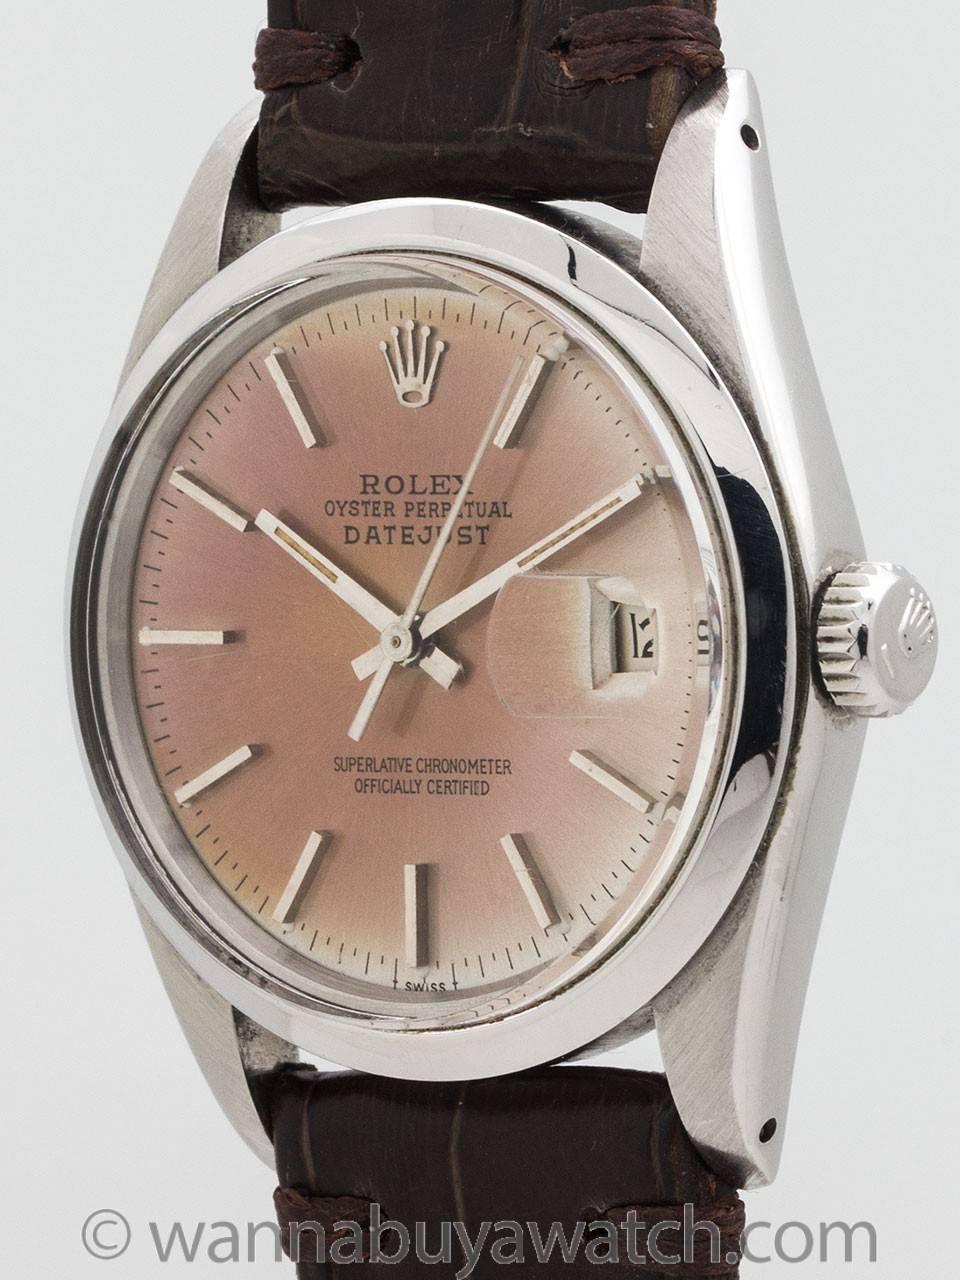 Rolex Datejust stainless steel scarce ref 16000 with richly patina’d original dial case serial #5.5 million circa 1978. Makes a wonderful commemorative gift for 1978 birthdays and anniversaries. Featuring a 36mm diameter case with smooth bezel,